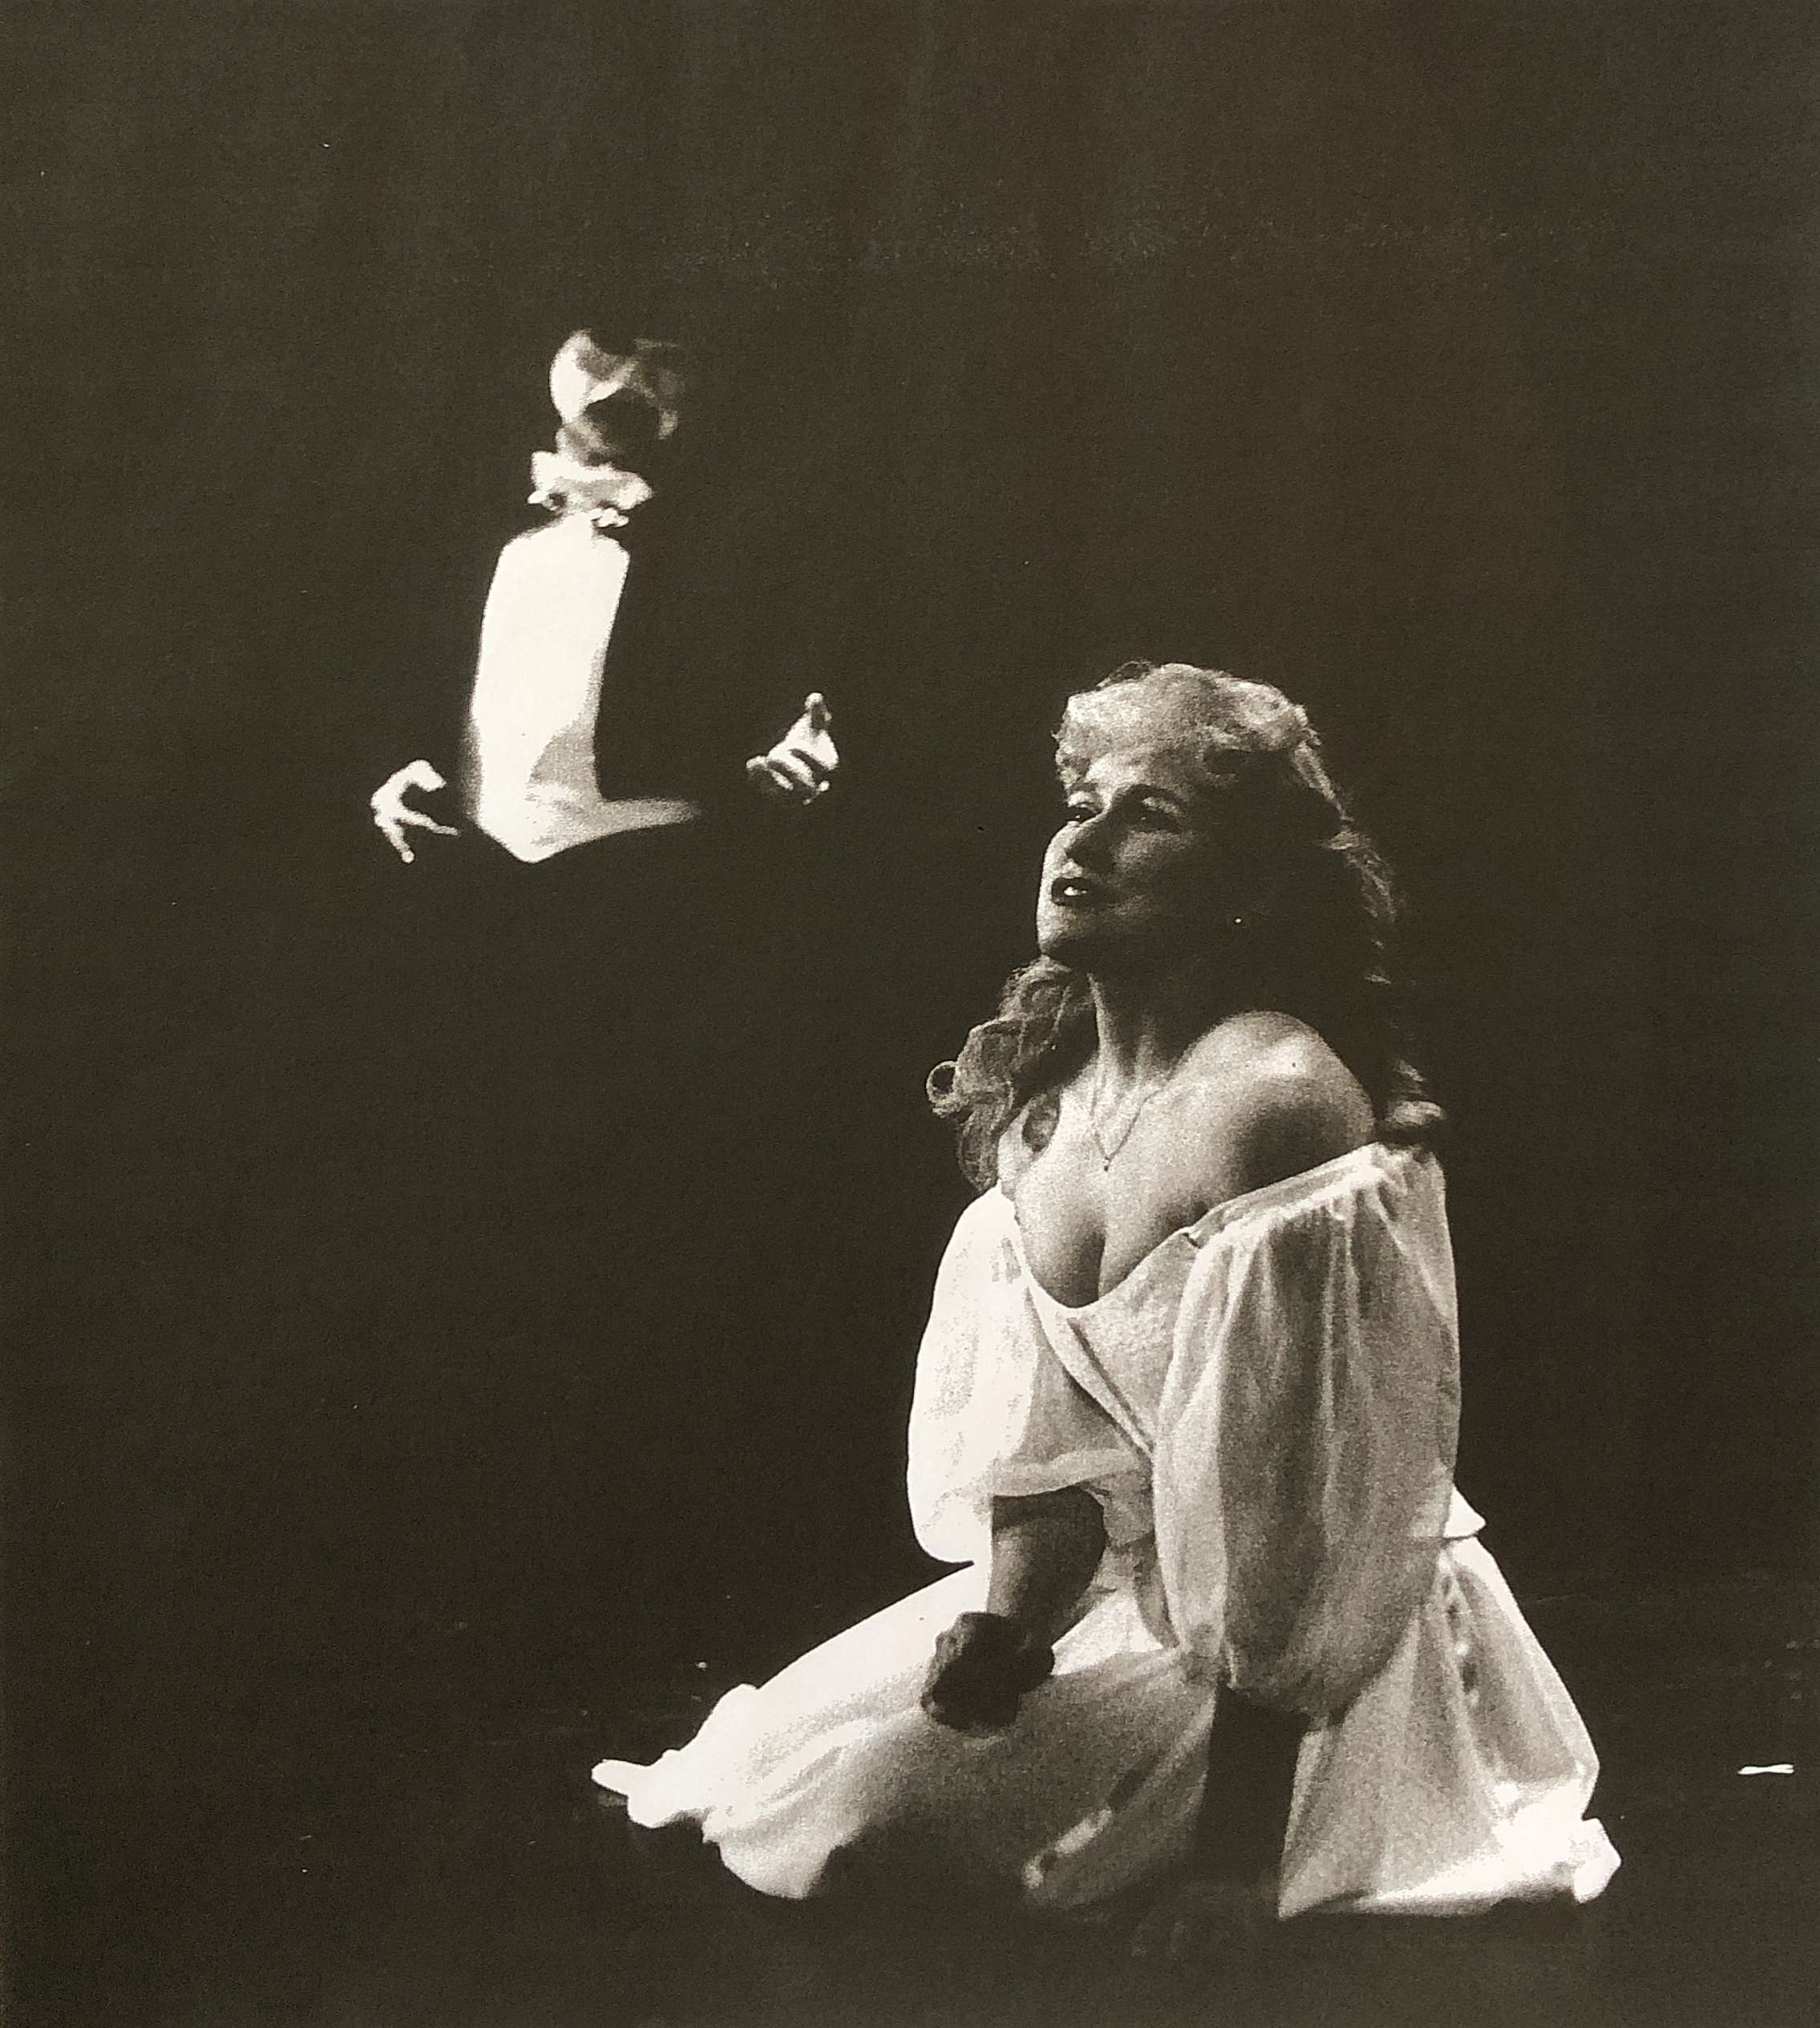 Peter Straker and Christina Collier in THE PHANTOM OF THE OPERA written and directed by Ken Hill, 1984